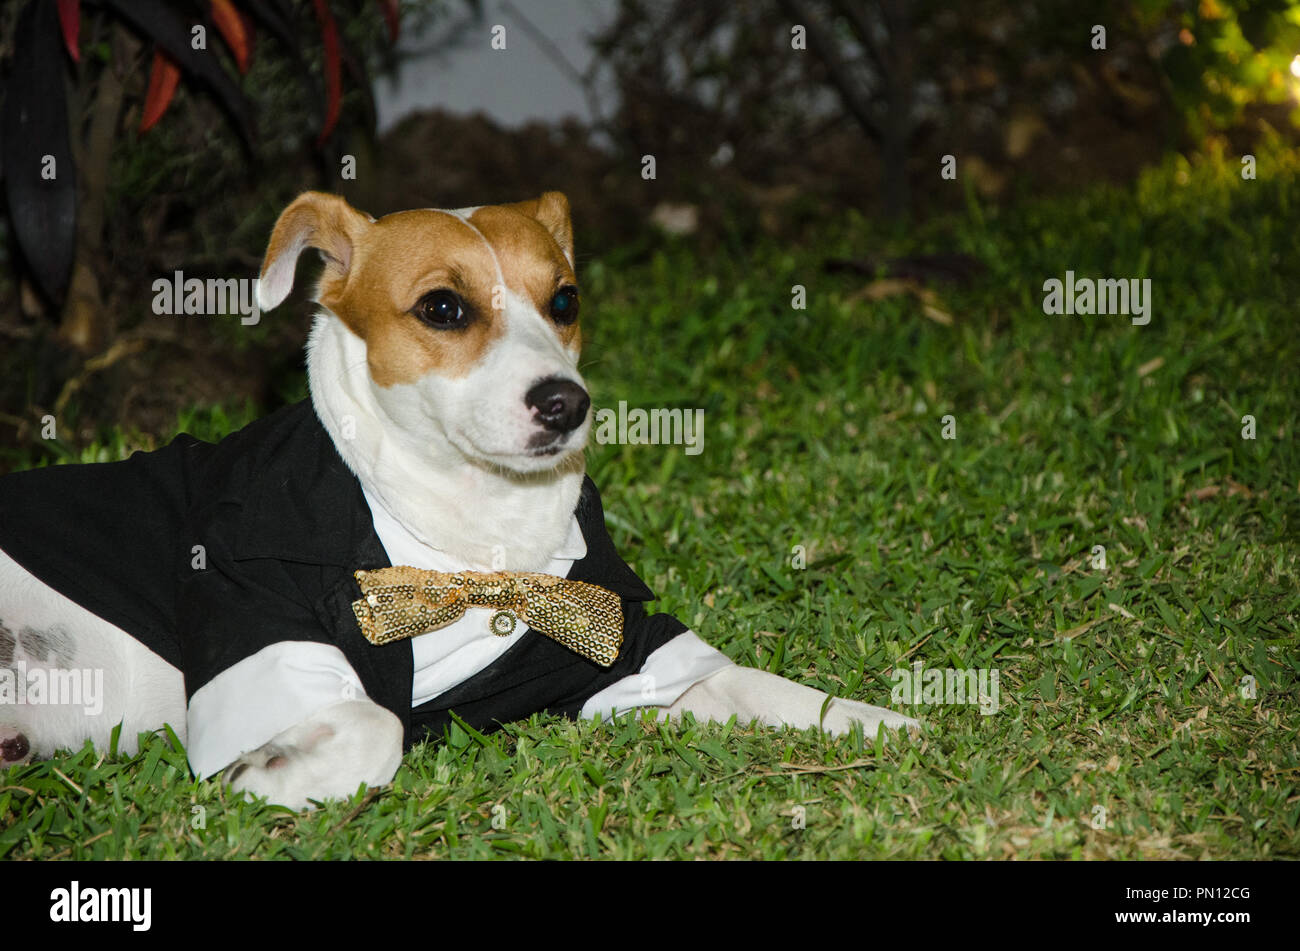 Jack Russell dog dressed smartly, dog with tie, funny photo Stock Photo